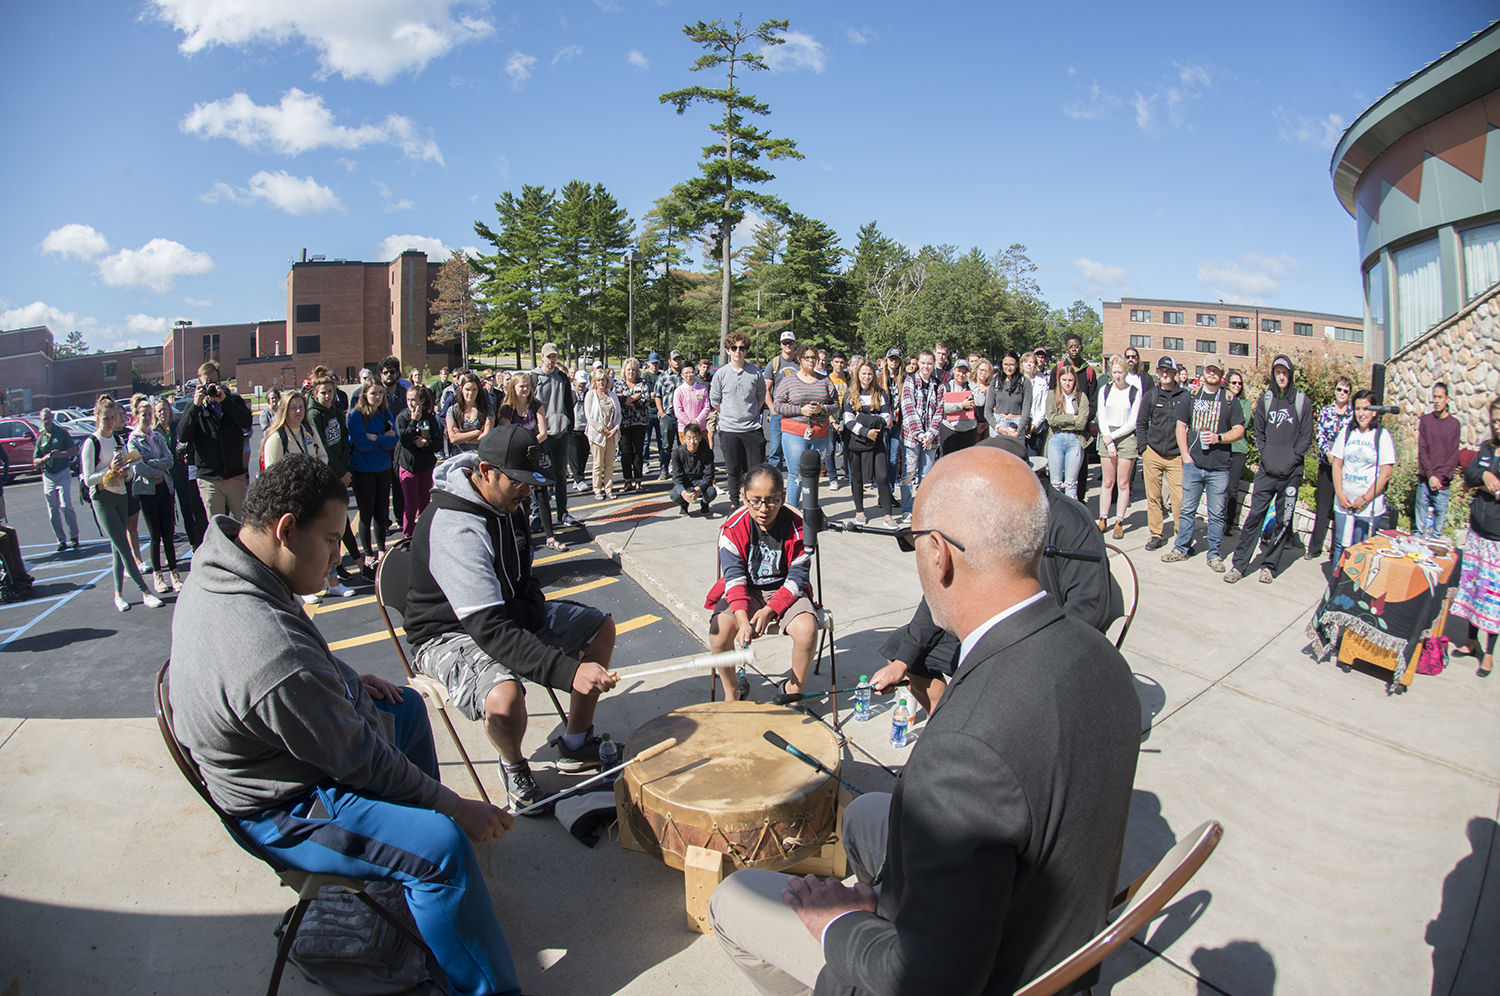 AIRC day of welcome in 2019, with people gathered in the parking lot surrounding a drum circle